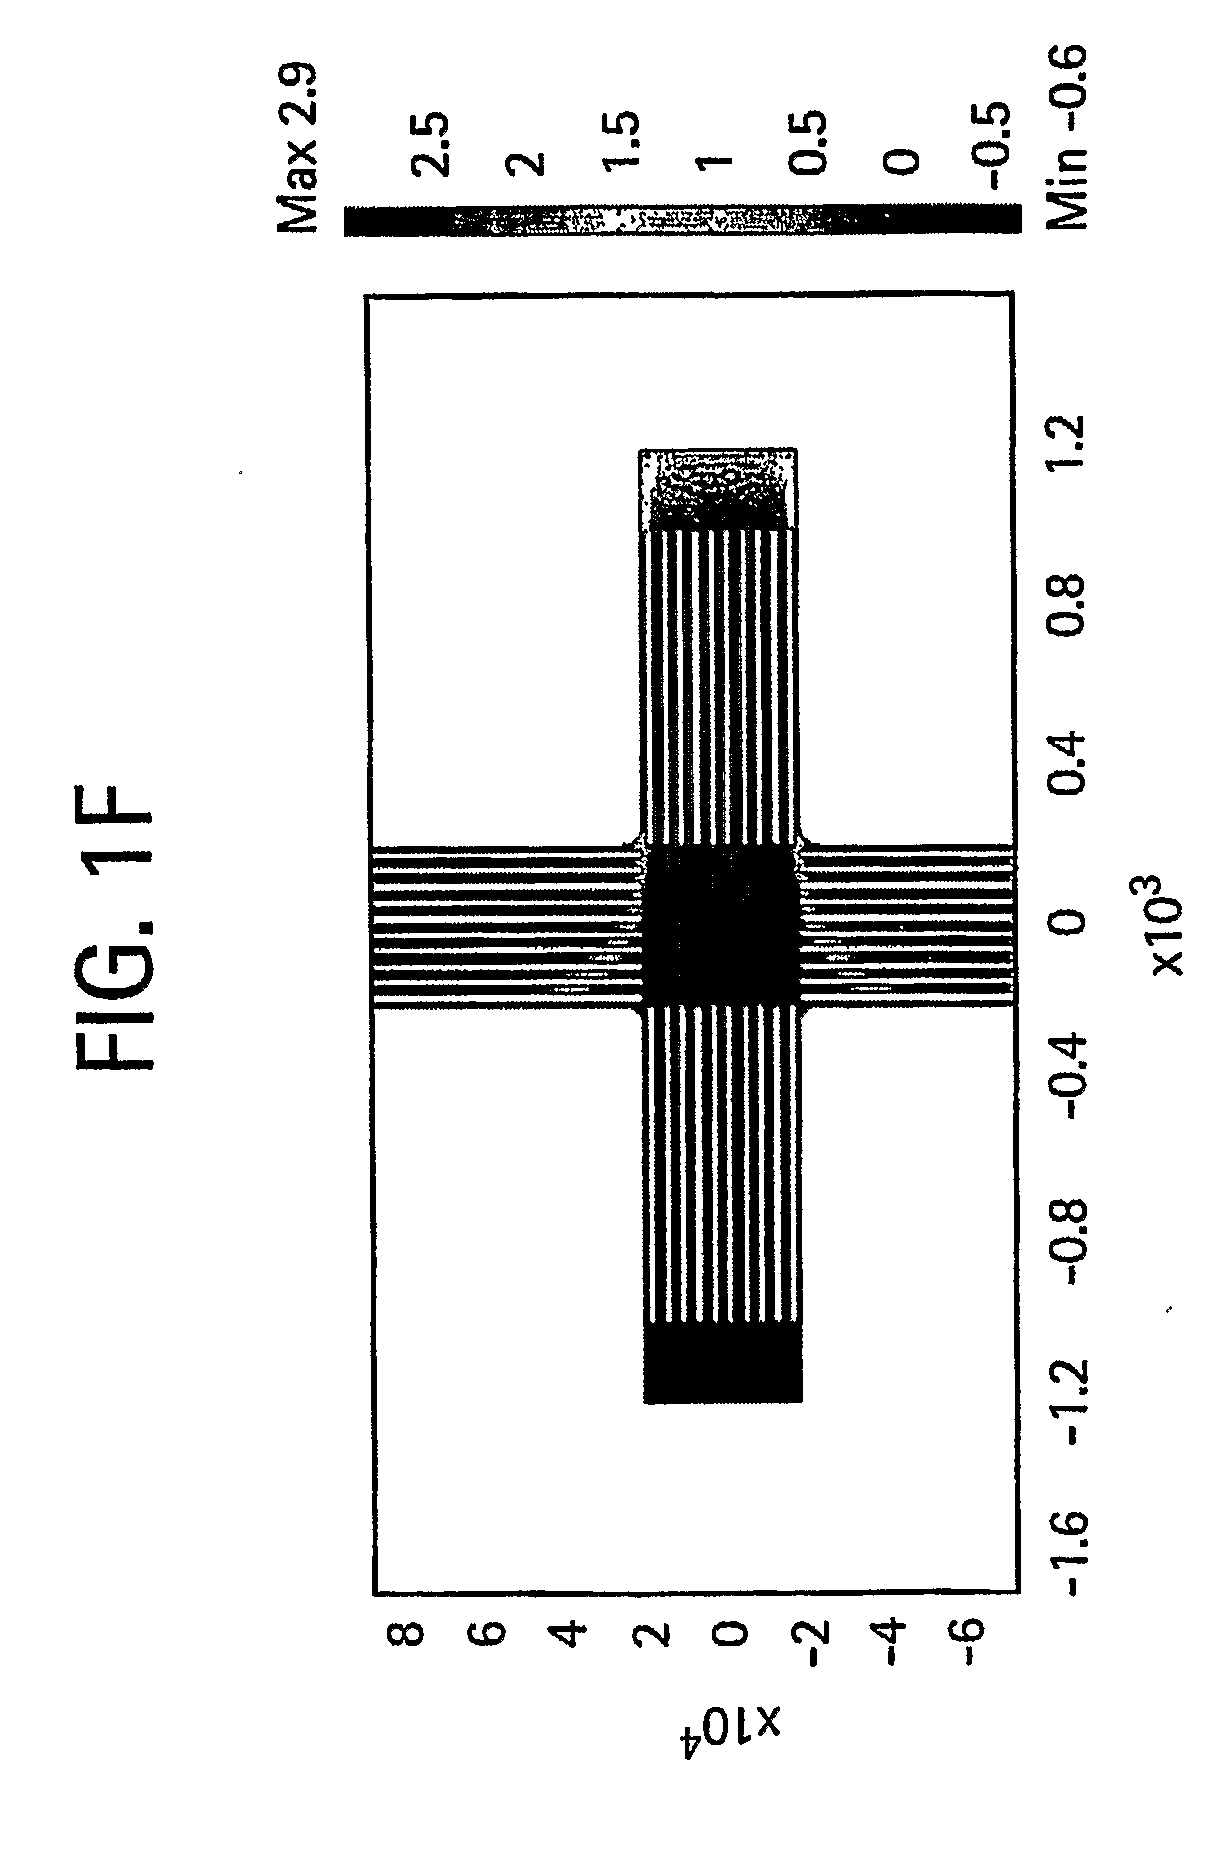 Devices Exhibiting Differential Resistance to Flow and Methods of Their Use